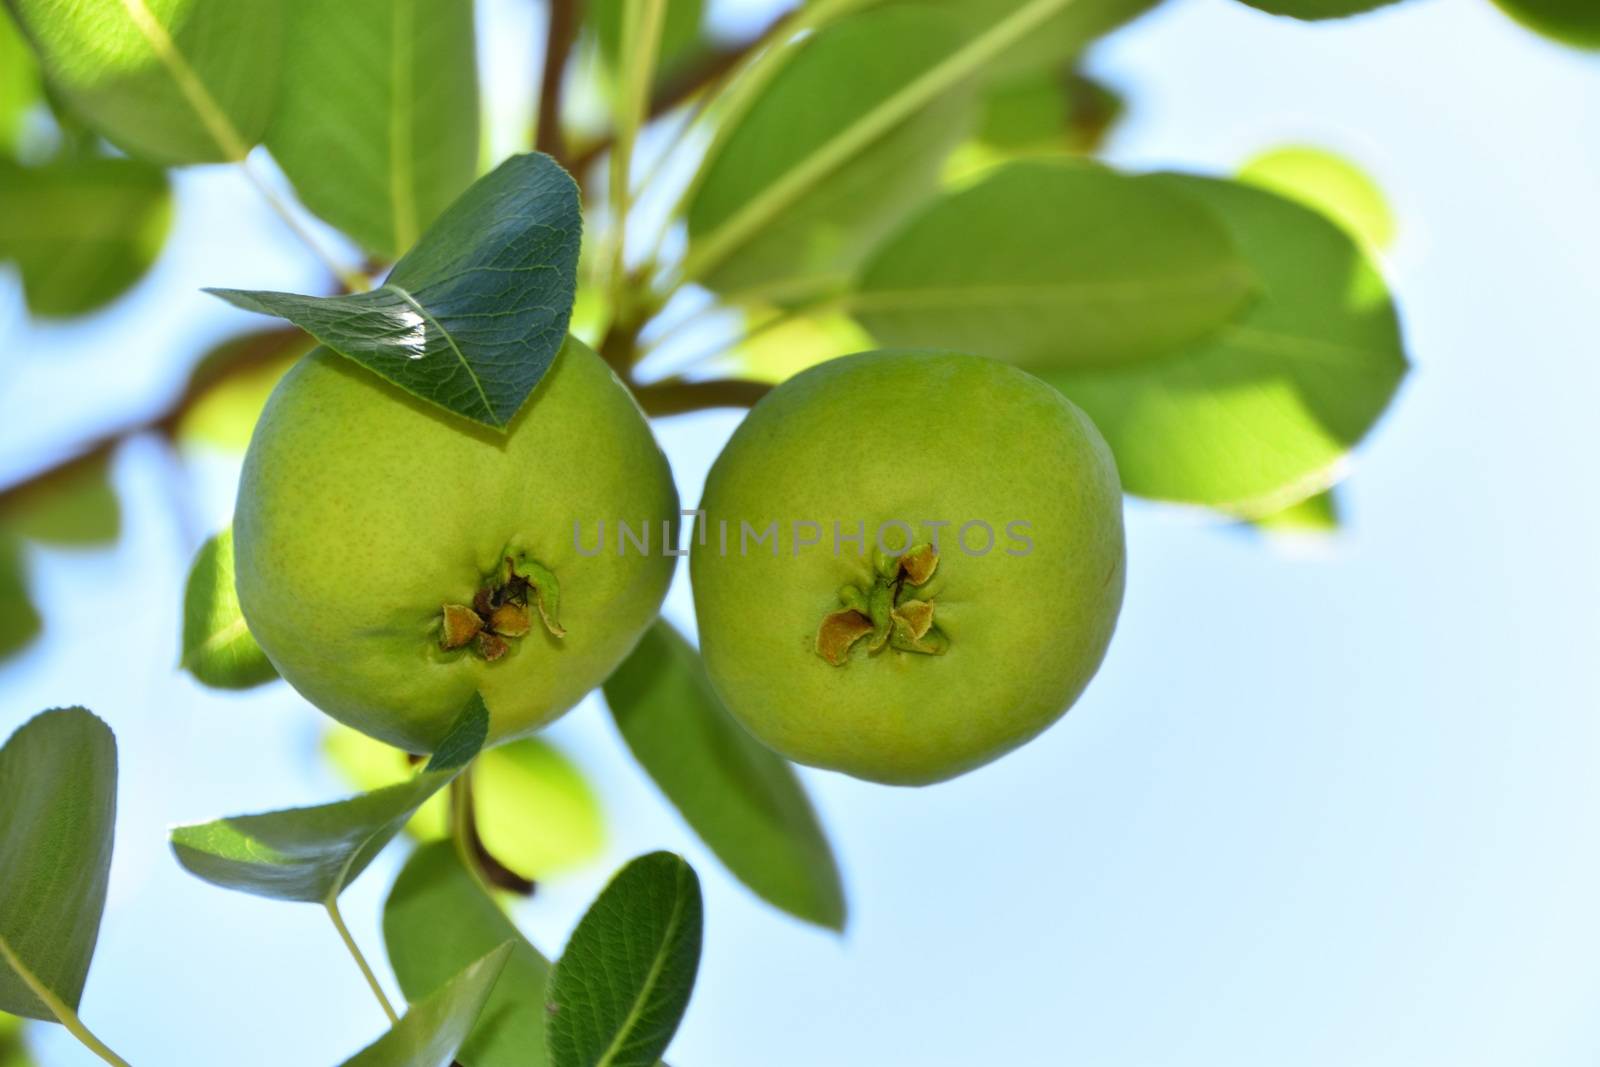 Two pears growing on a pear tree